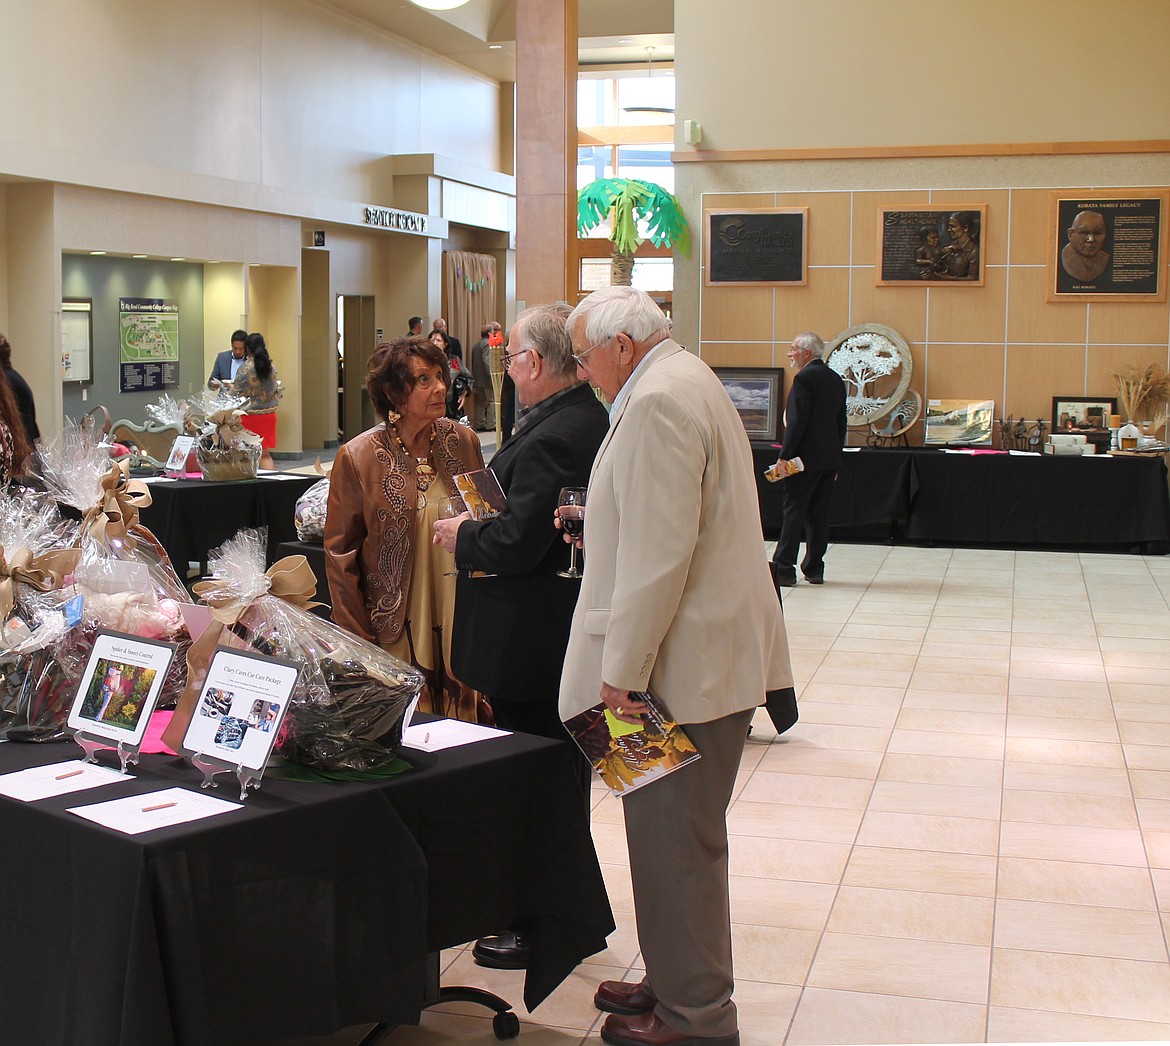 From left, Cheri Smith, Jack McLauchlan and Ed Smith check out the silent auction offerings at Cellarbration! For Education this past Saturday evening.